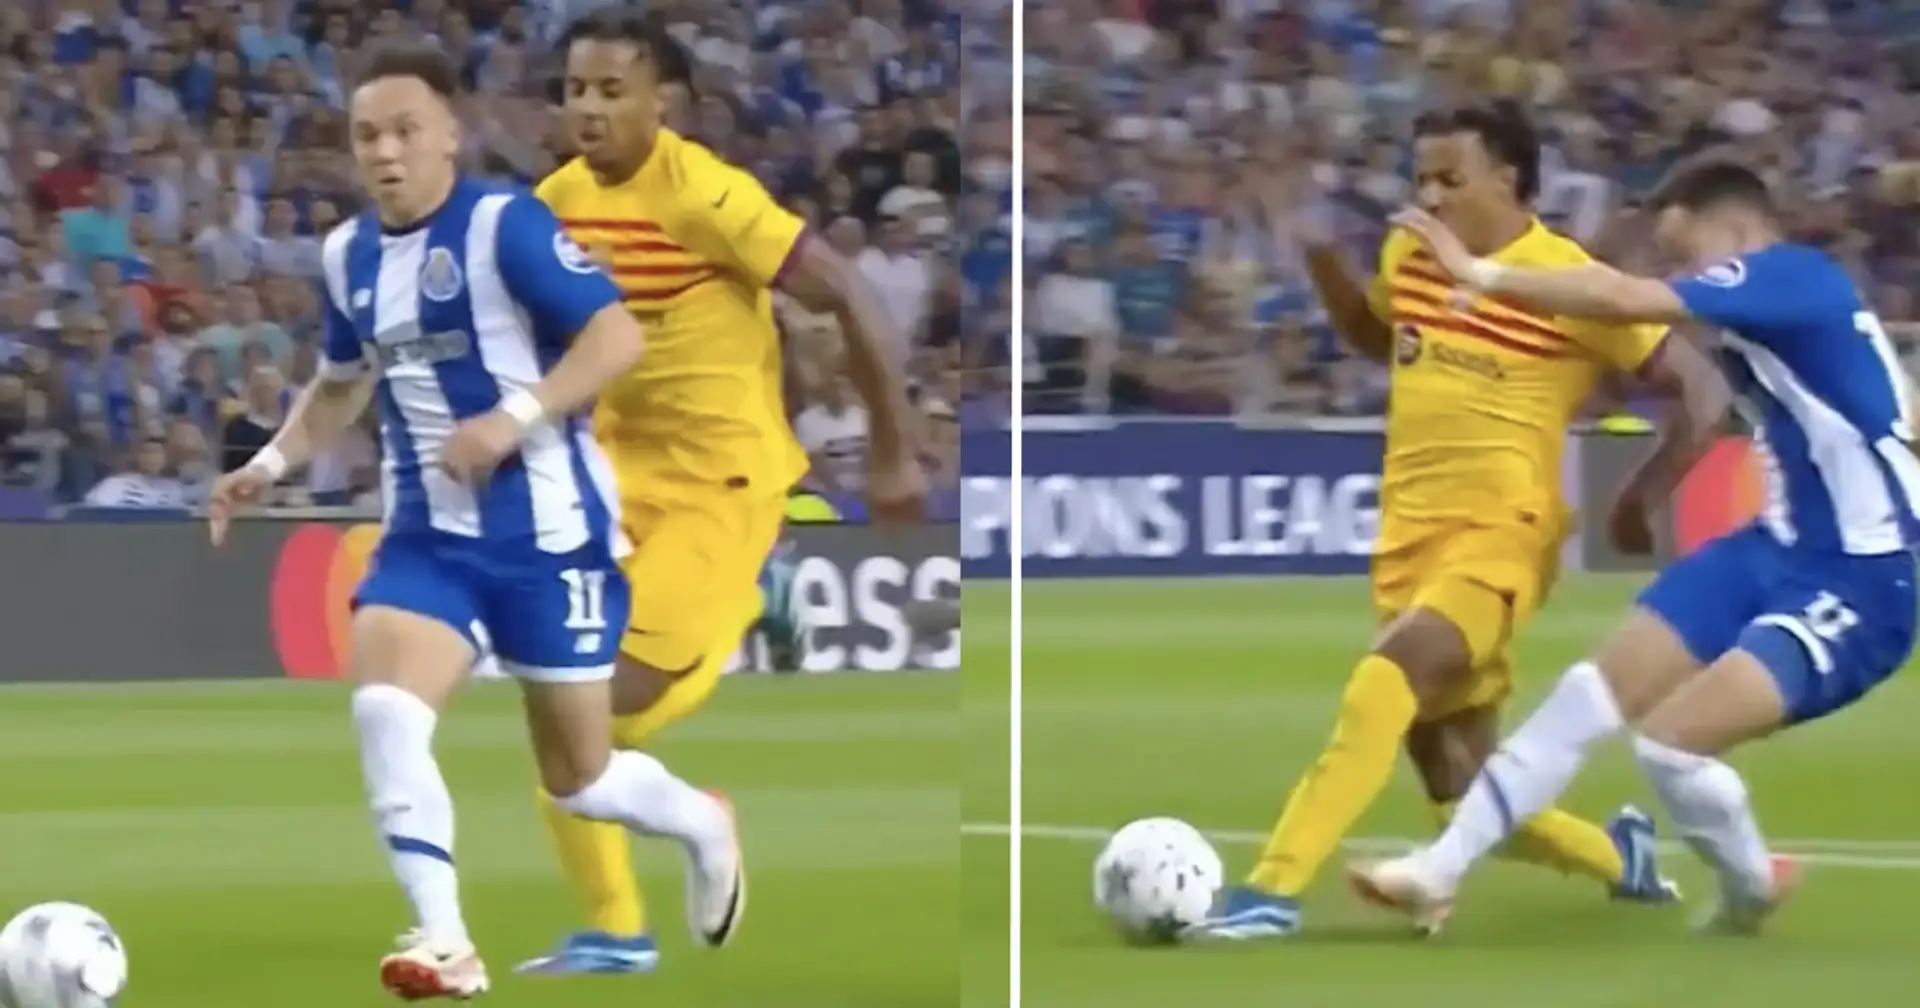 Watch Jules Kounde stop Porto's dangerous attack with perfectly clean tackle (video)